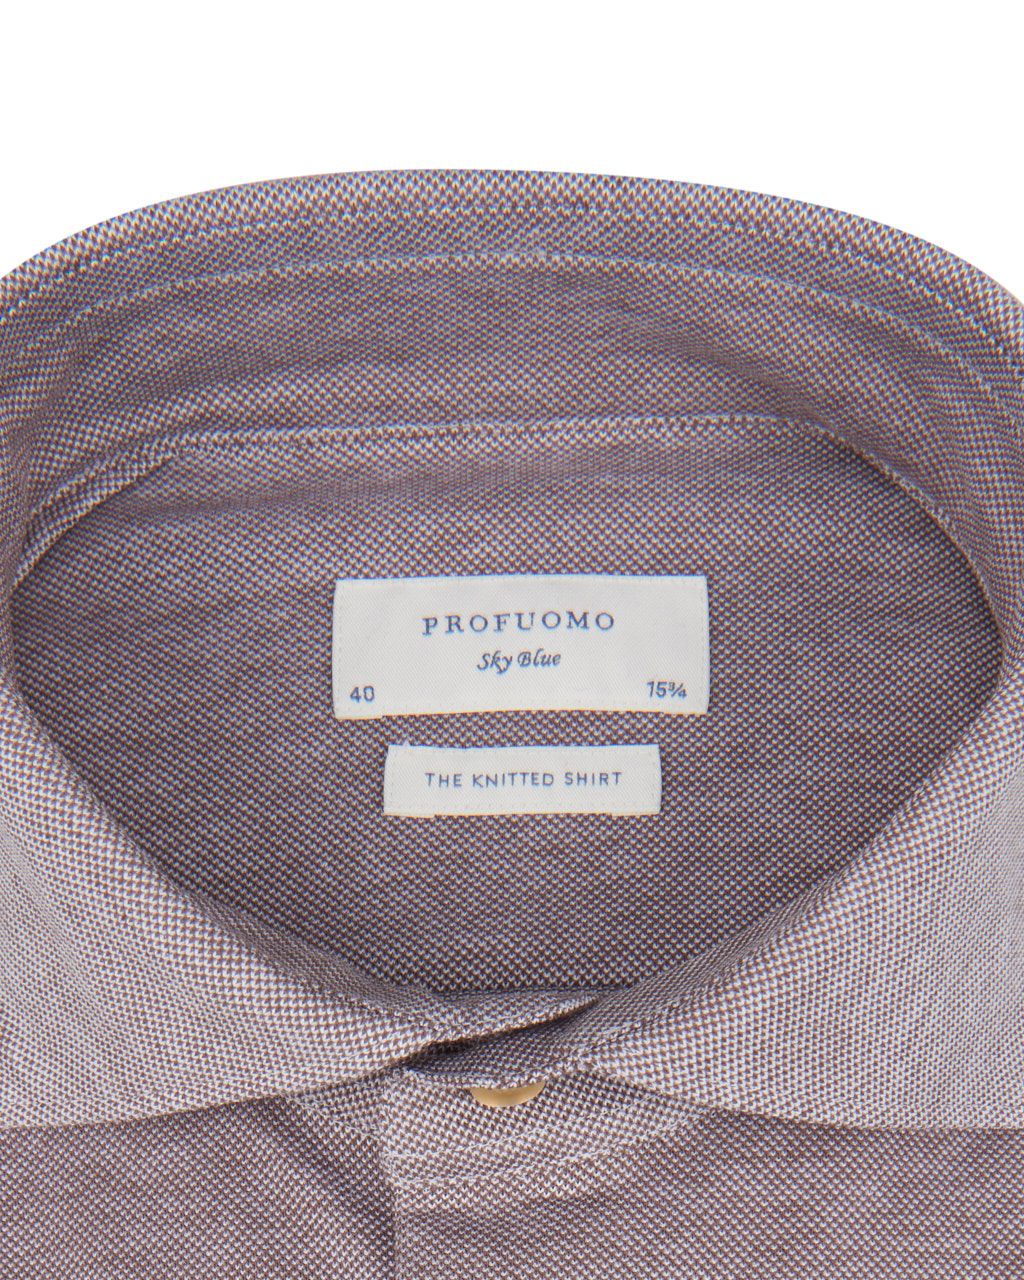 Profuomo Sky Blue Knitted Overhemd LM Camel 071492-001-37